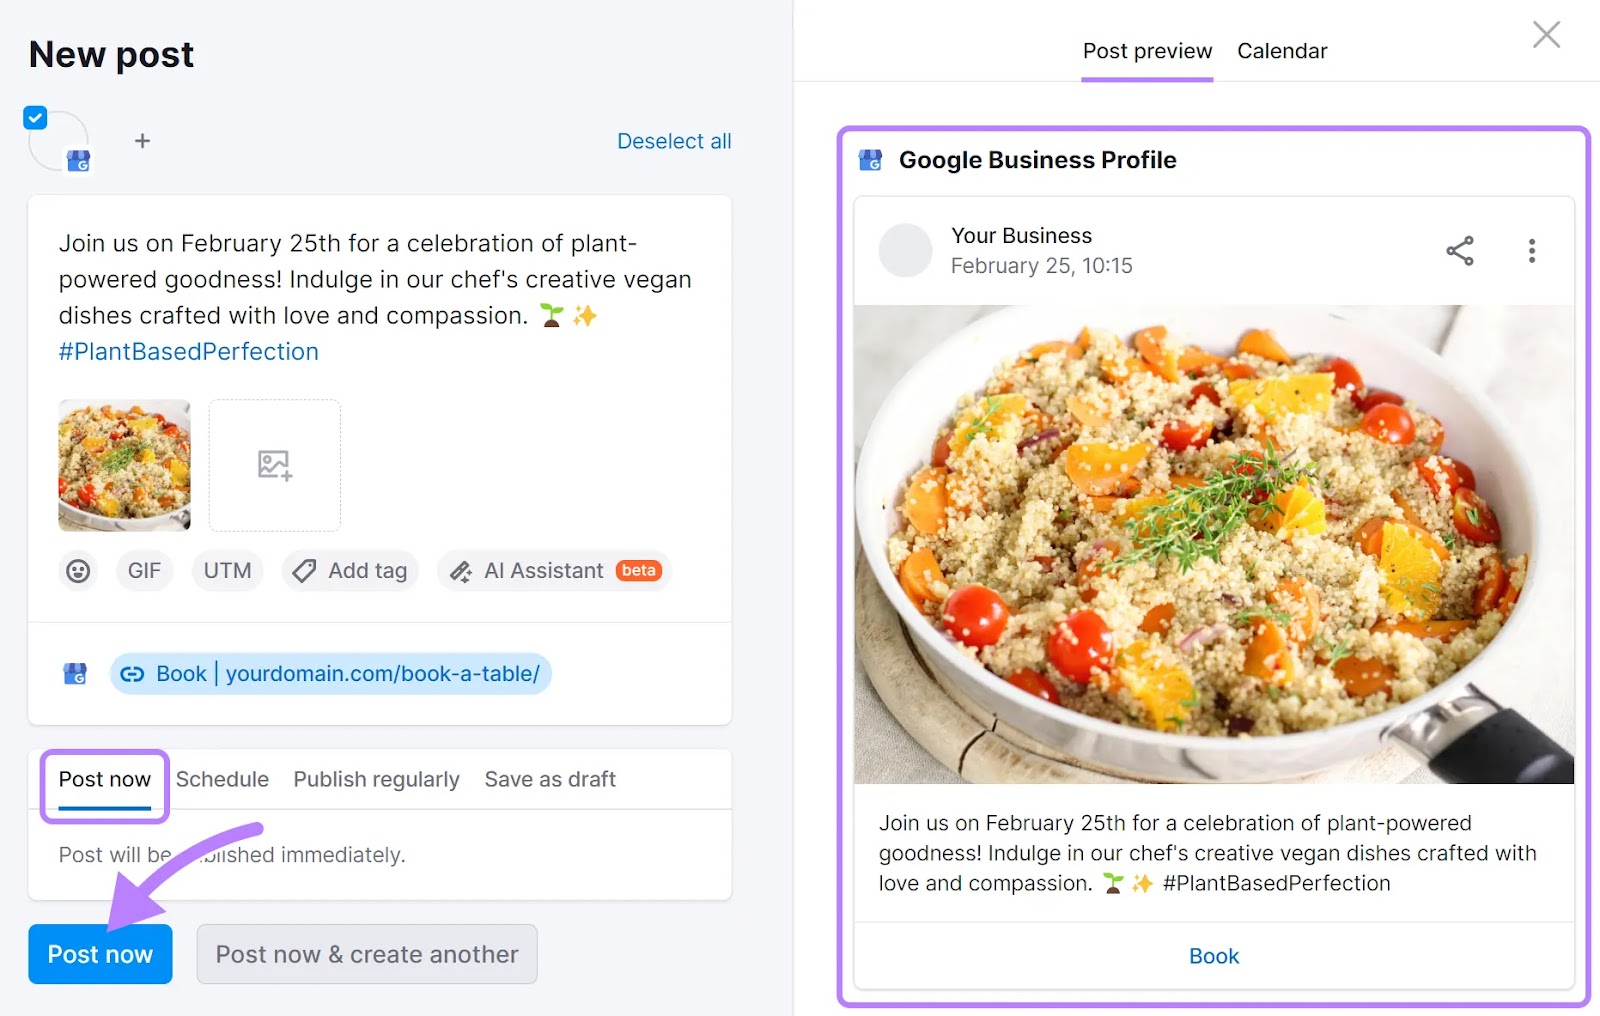 "New post" (left) and "Post preview" (right) windows in Social Poster tool